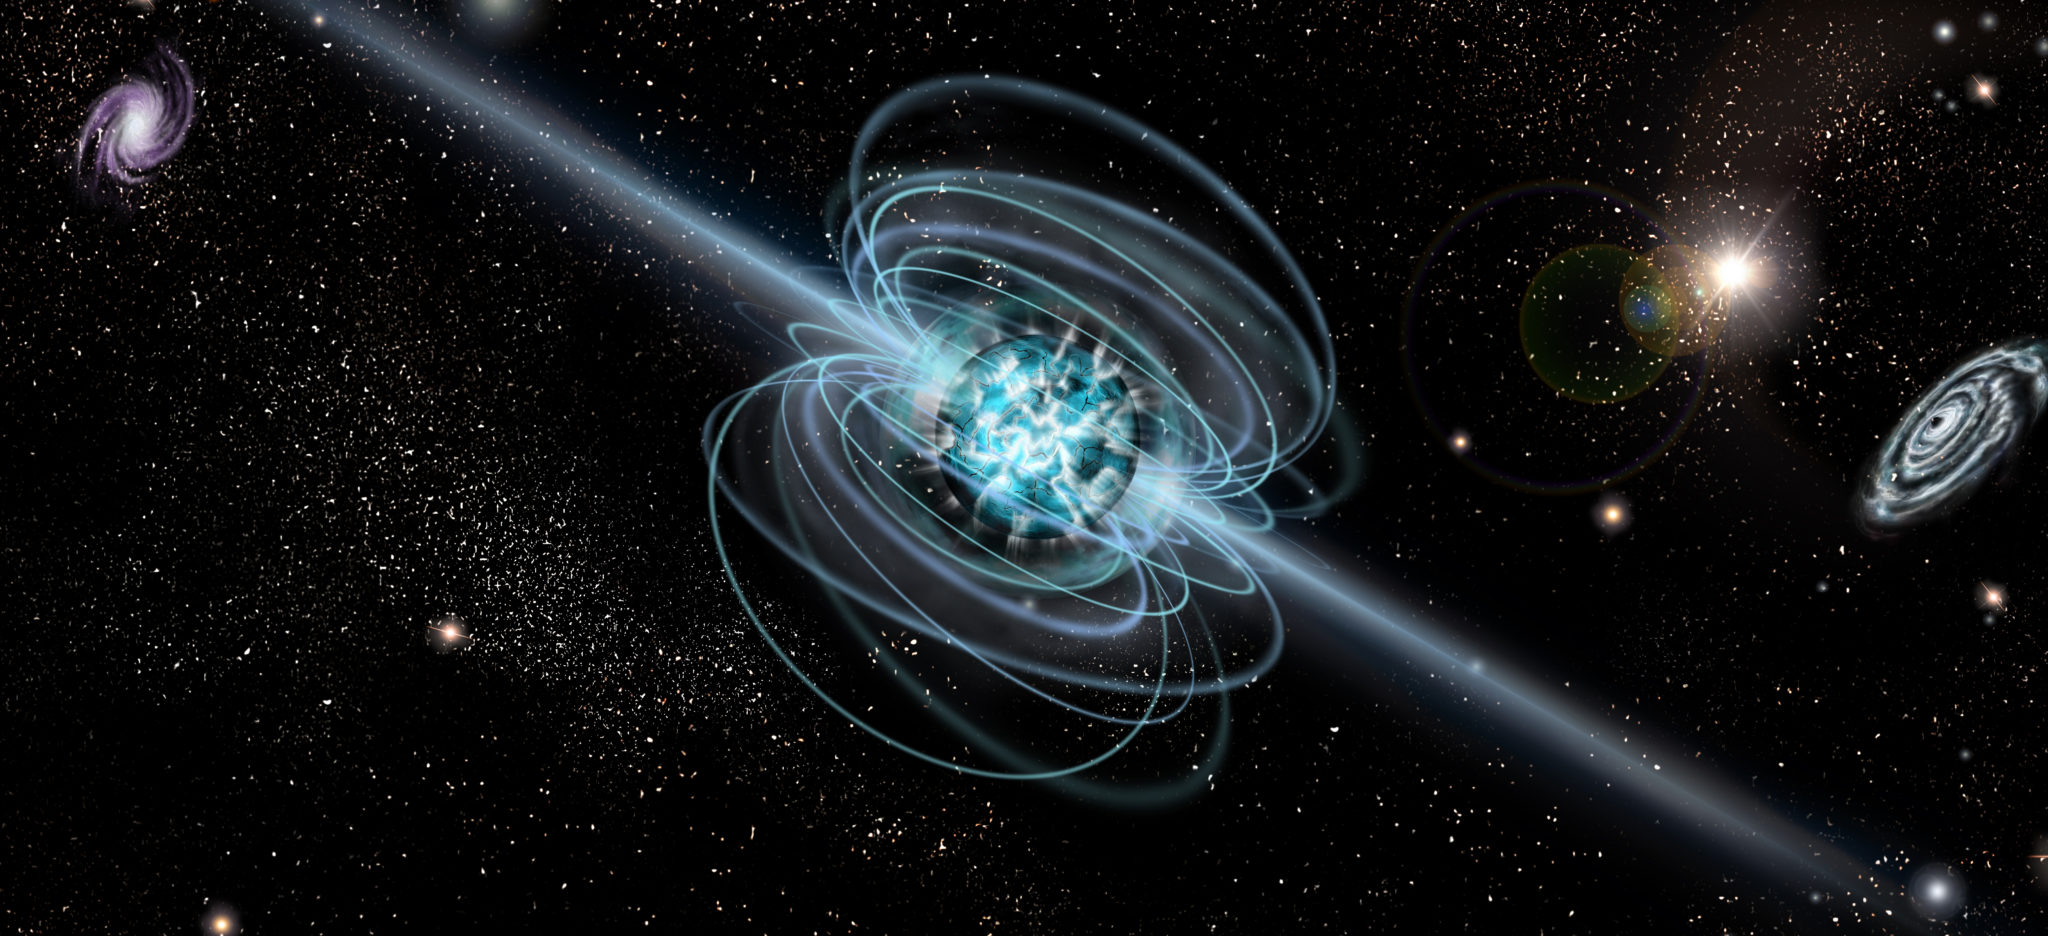 Magnetar,Neutron,Star,With,High,Magnetic,Field,In,A,Deep